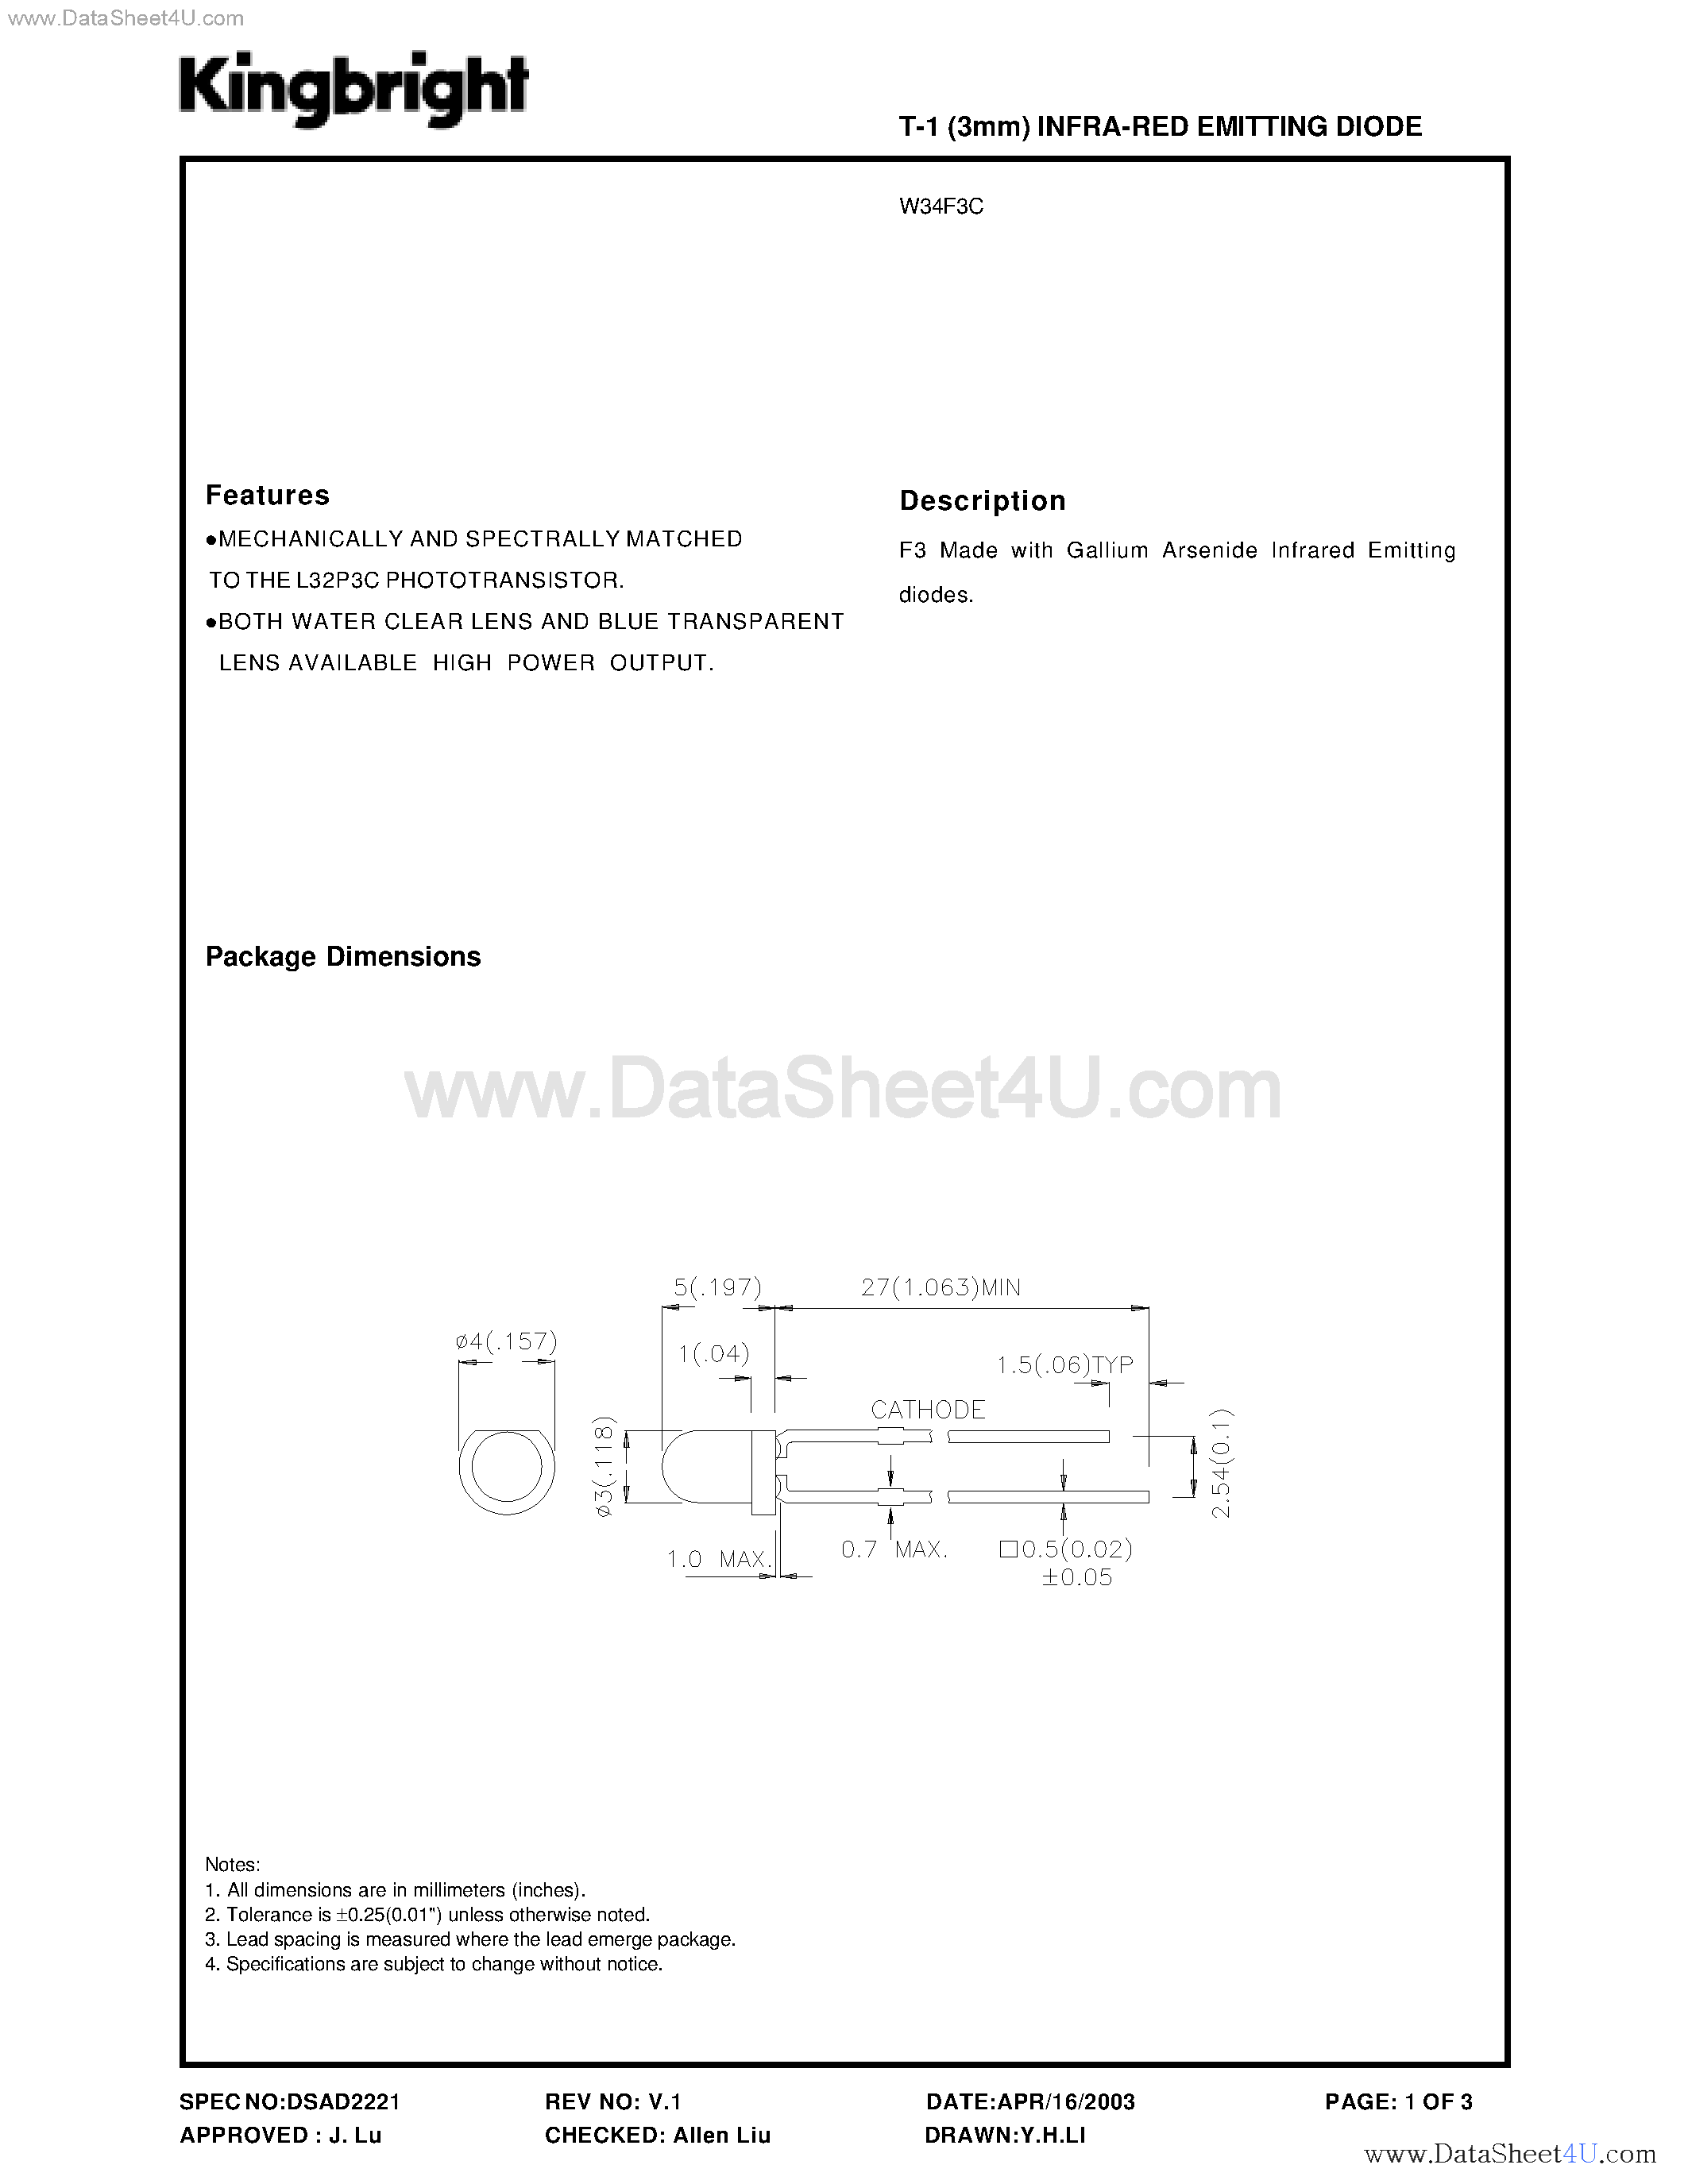 Datasheet W34F3C - T-1 (3mm) INFRA-RED EMITTING DIODE page 1